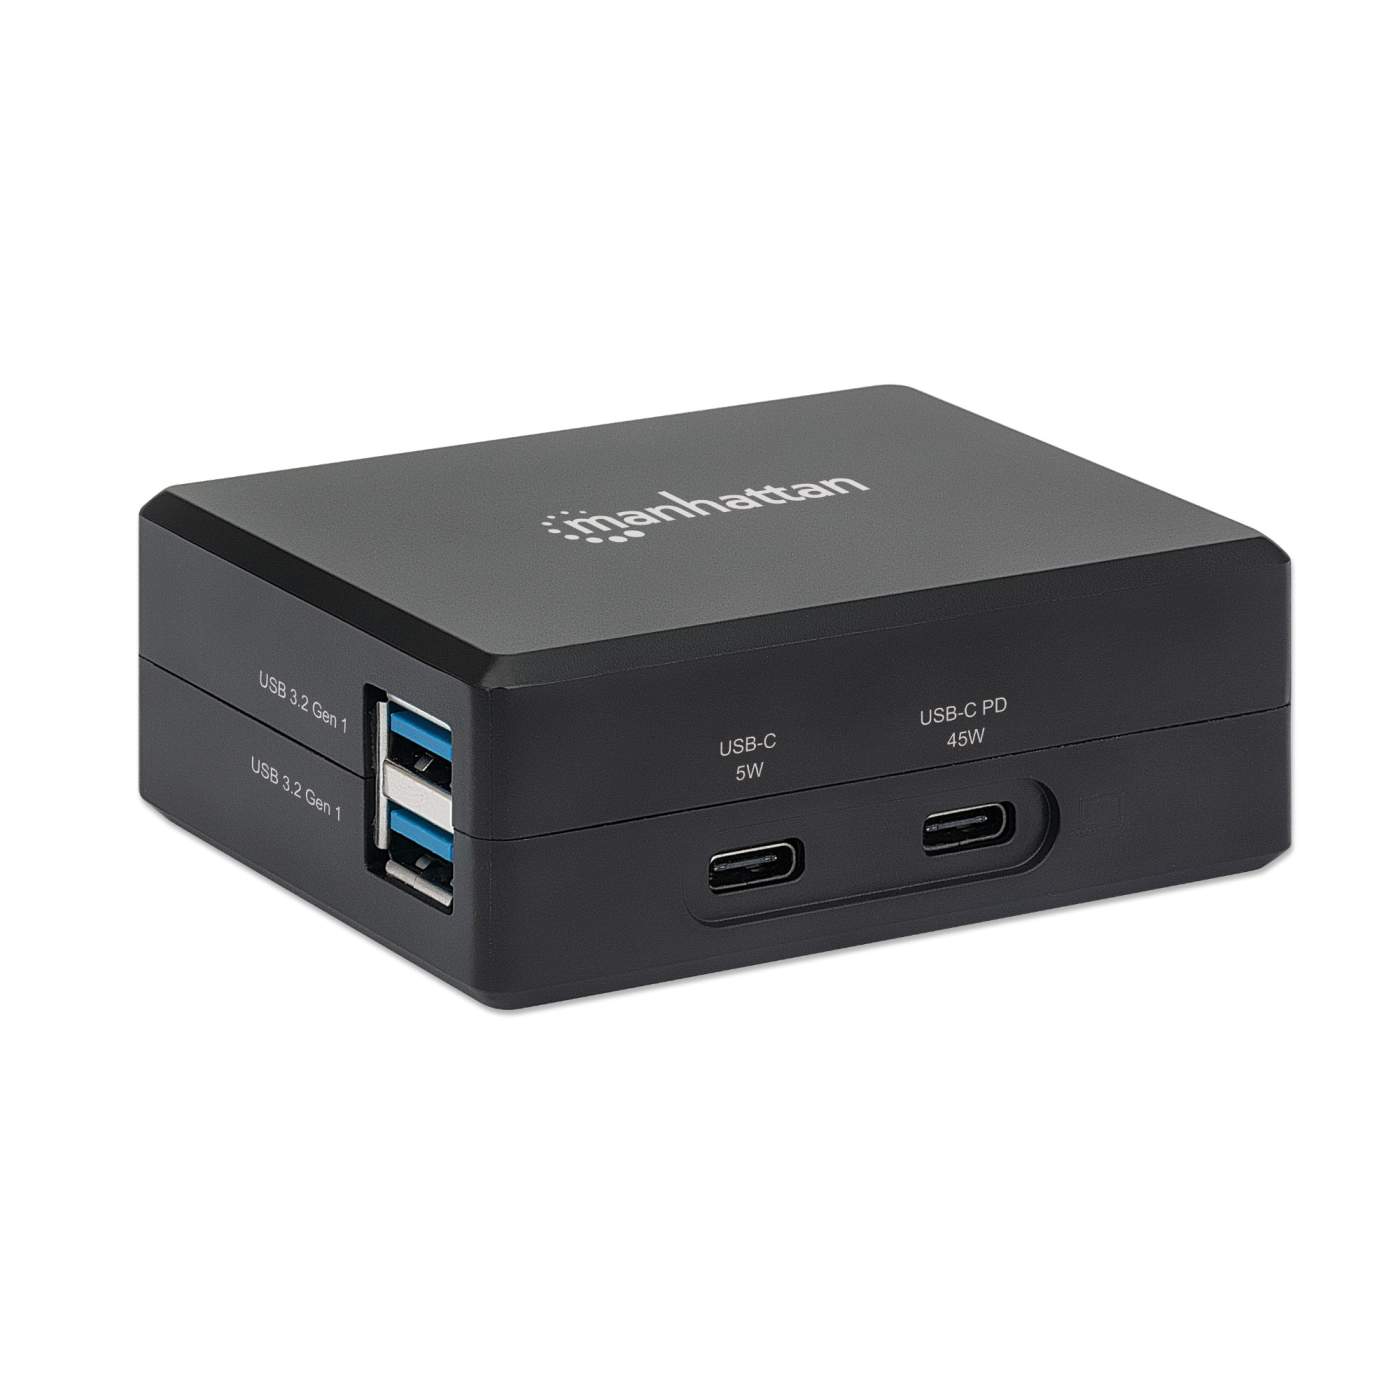 USB C PD Charger 45 W and USB C to HDMI Multiport Dock with 2 x USB C and 2 x USB A ports, compact travel docking station with internal power supply, for Chomebook, Surface, Laptop Image 3